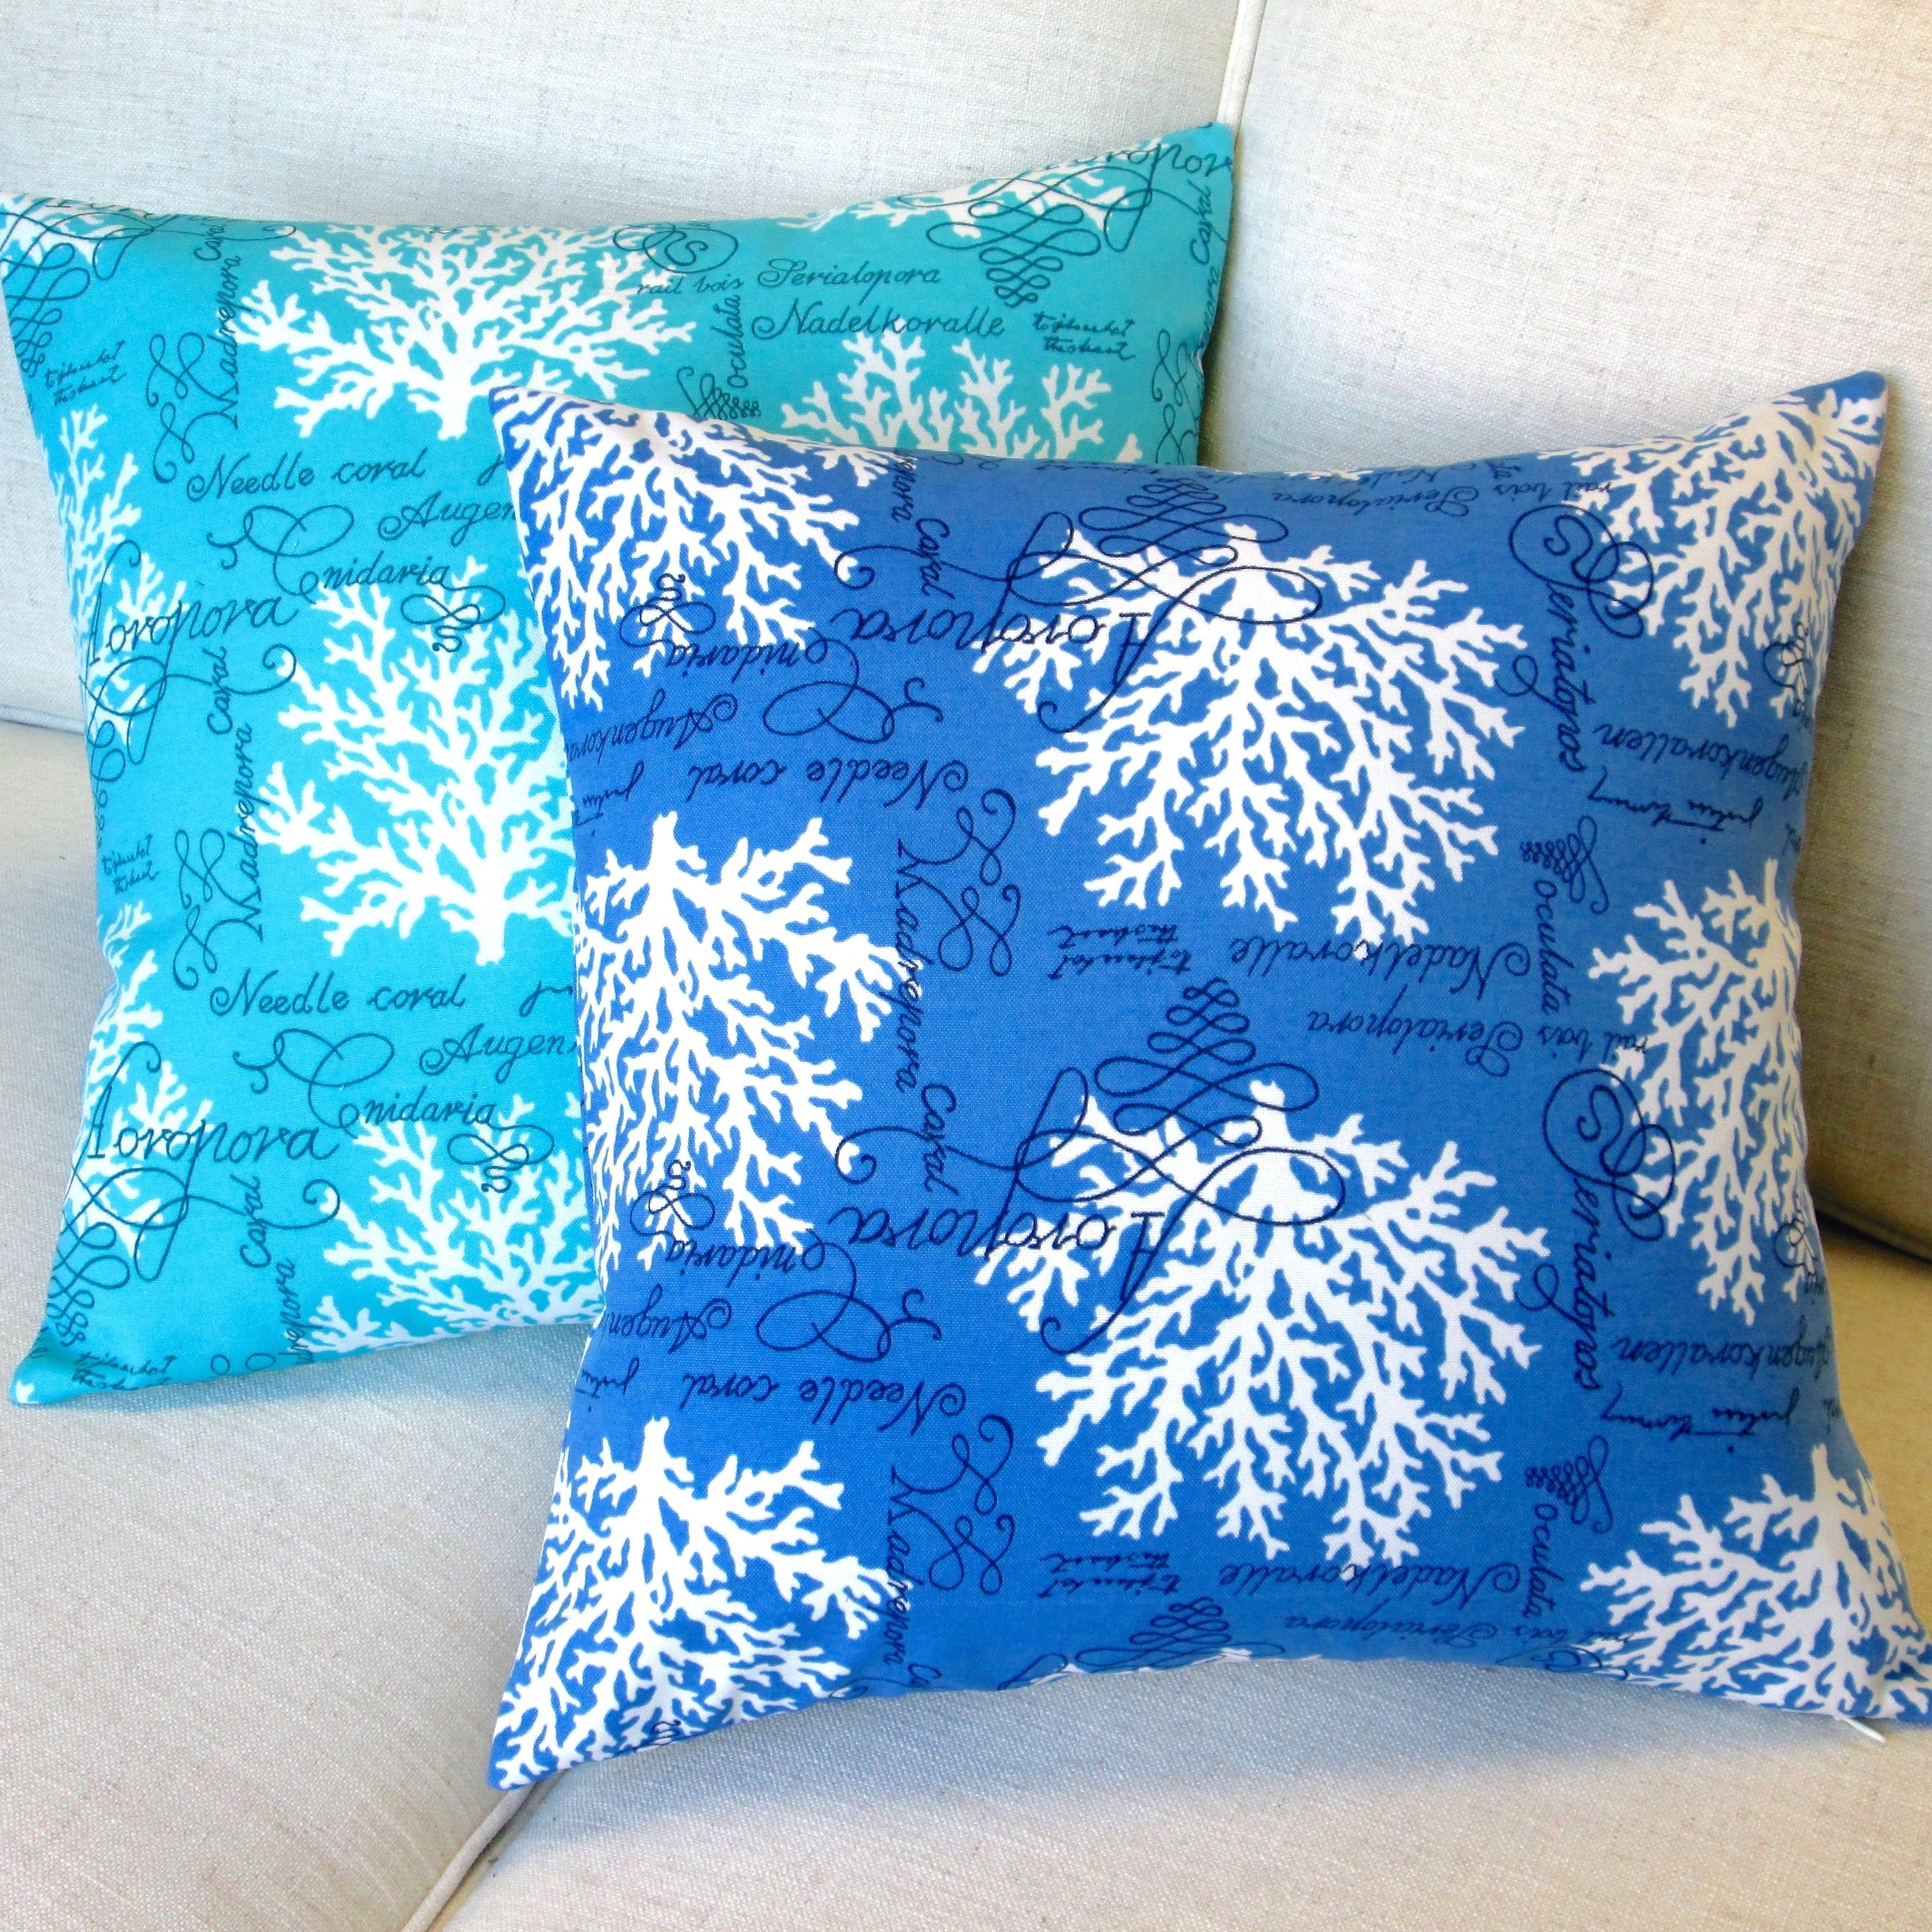 https://ak1.ostkcdn.com/images/products/13682645/Artisan-Pillows-18-inch-Sea-Reef-in-Blue-or-Turquoise-Throw-Pillow-Set-of-2-41cbdd31-cb10-4766-bc24-d27bbeb7565e.jpg